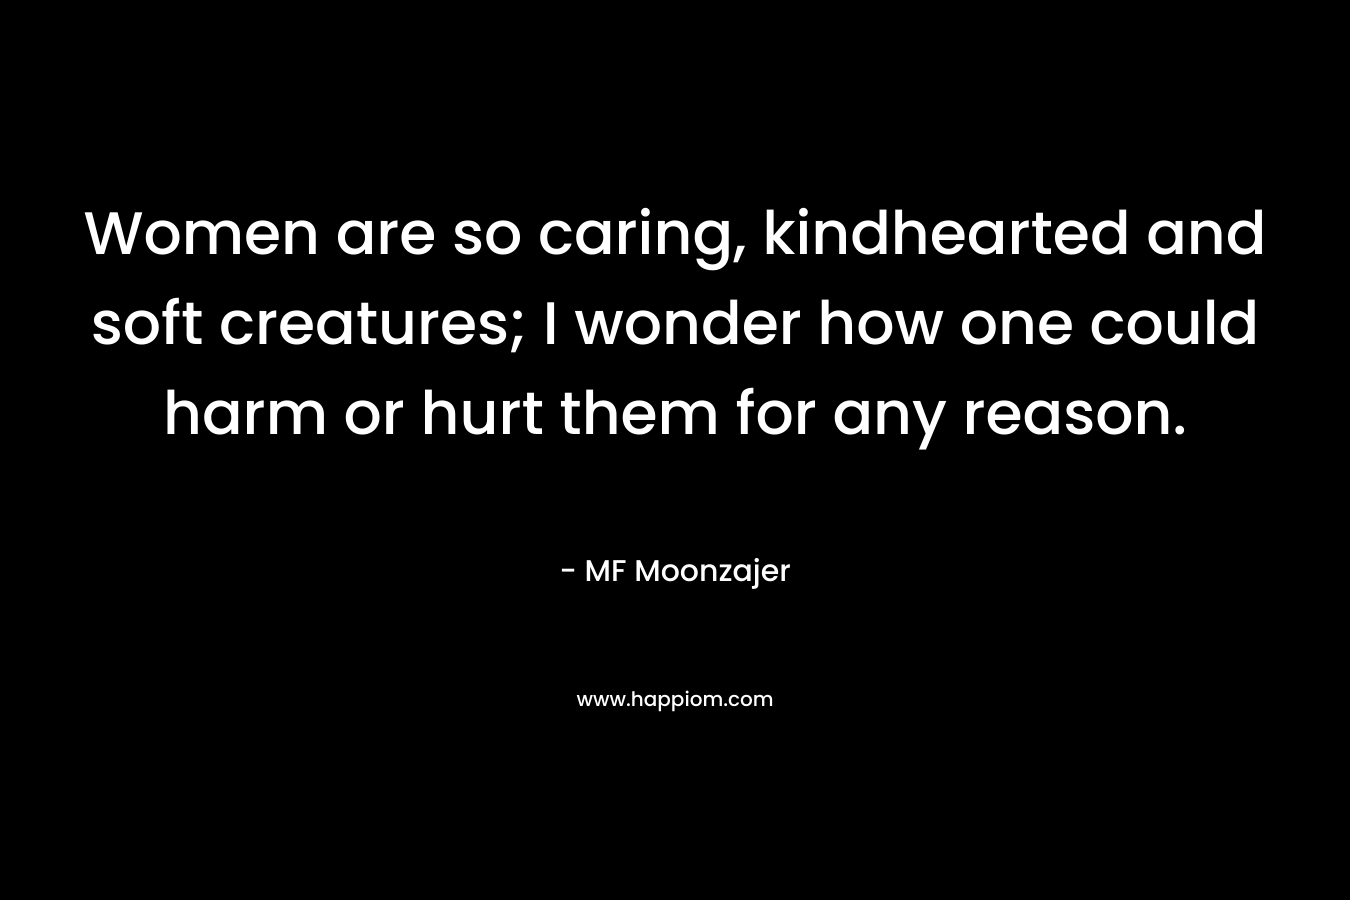 Women are so caring, kindhearted and soft creatures; I wonder how one could harm or hurt them for any reason. – MF Moonzajer